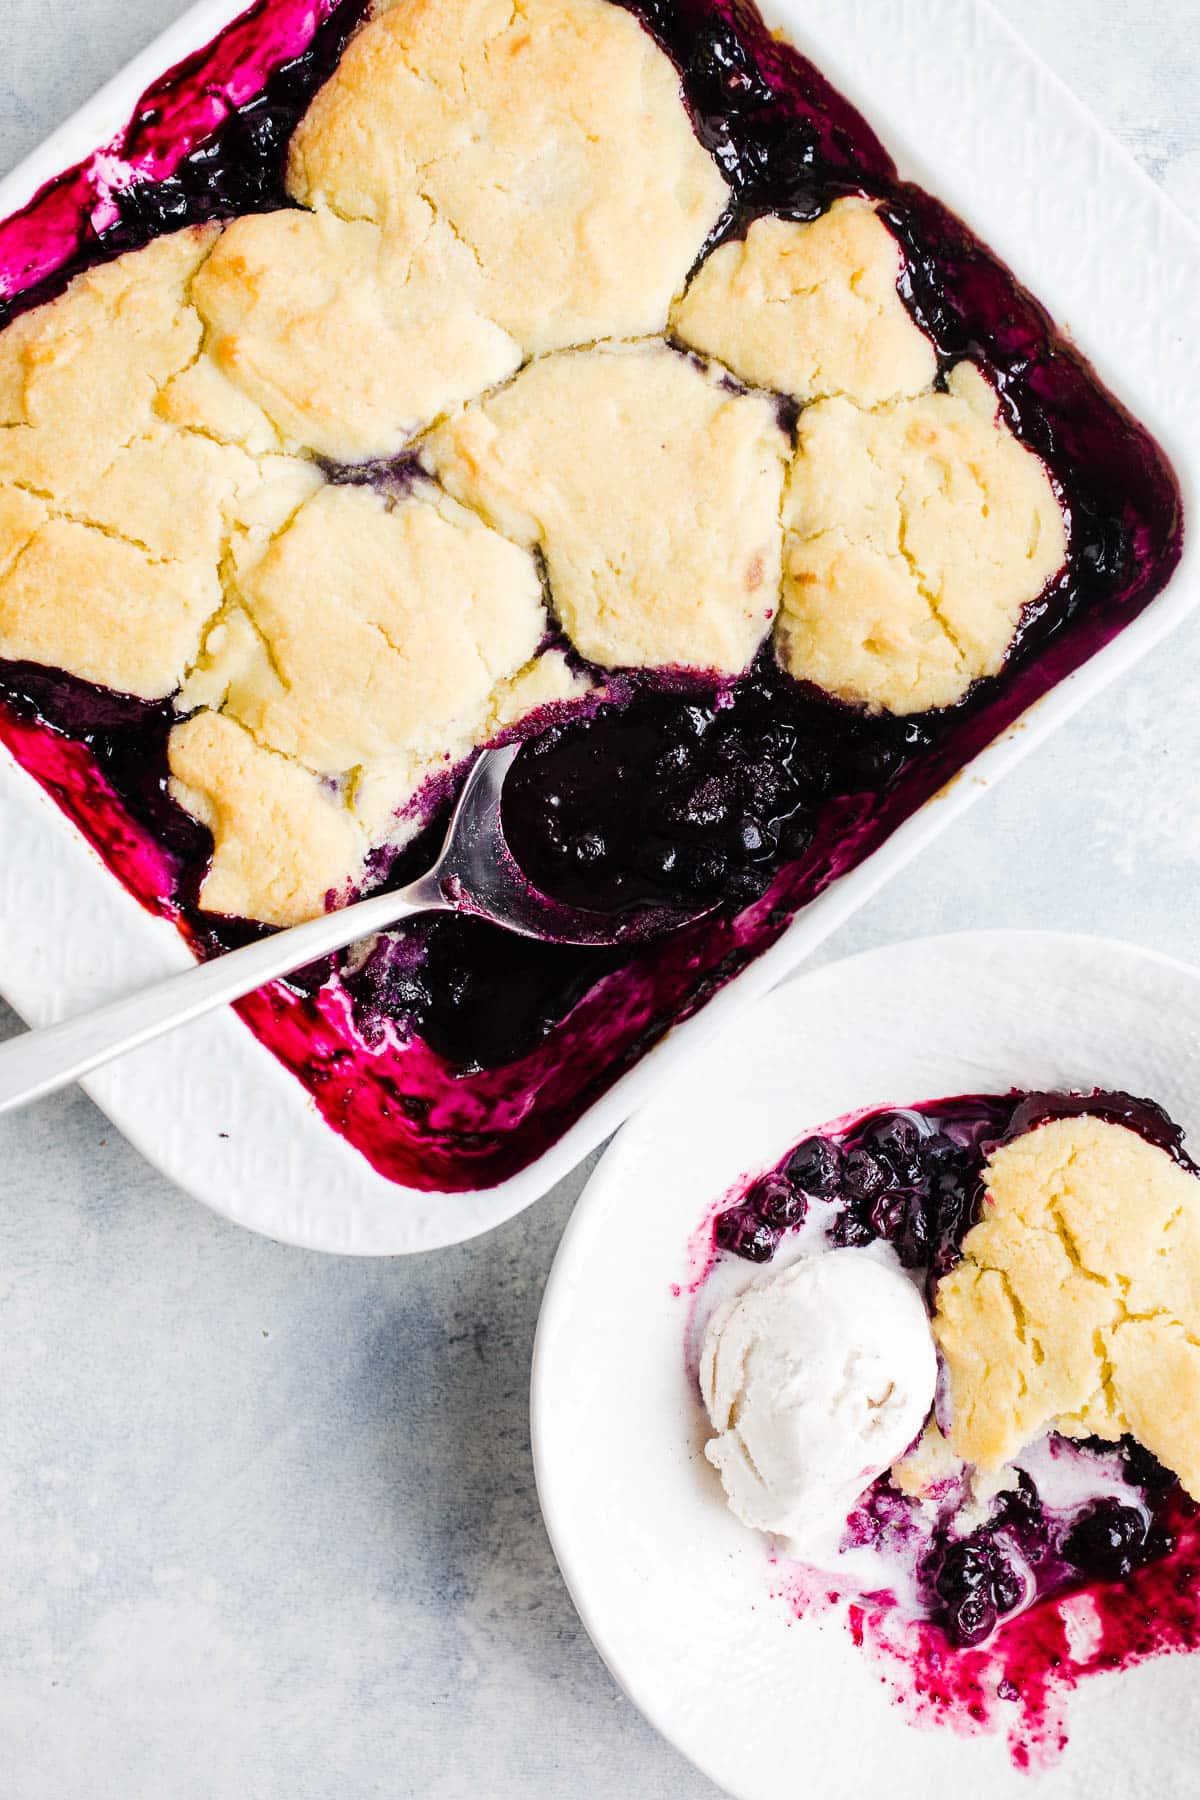 Golden brown biscuits on top of baked blueberry filling in a white baking dish.